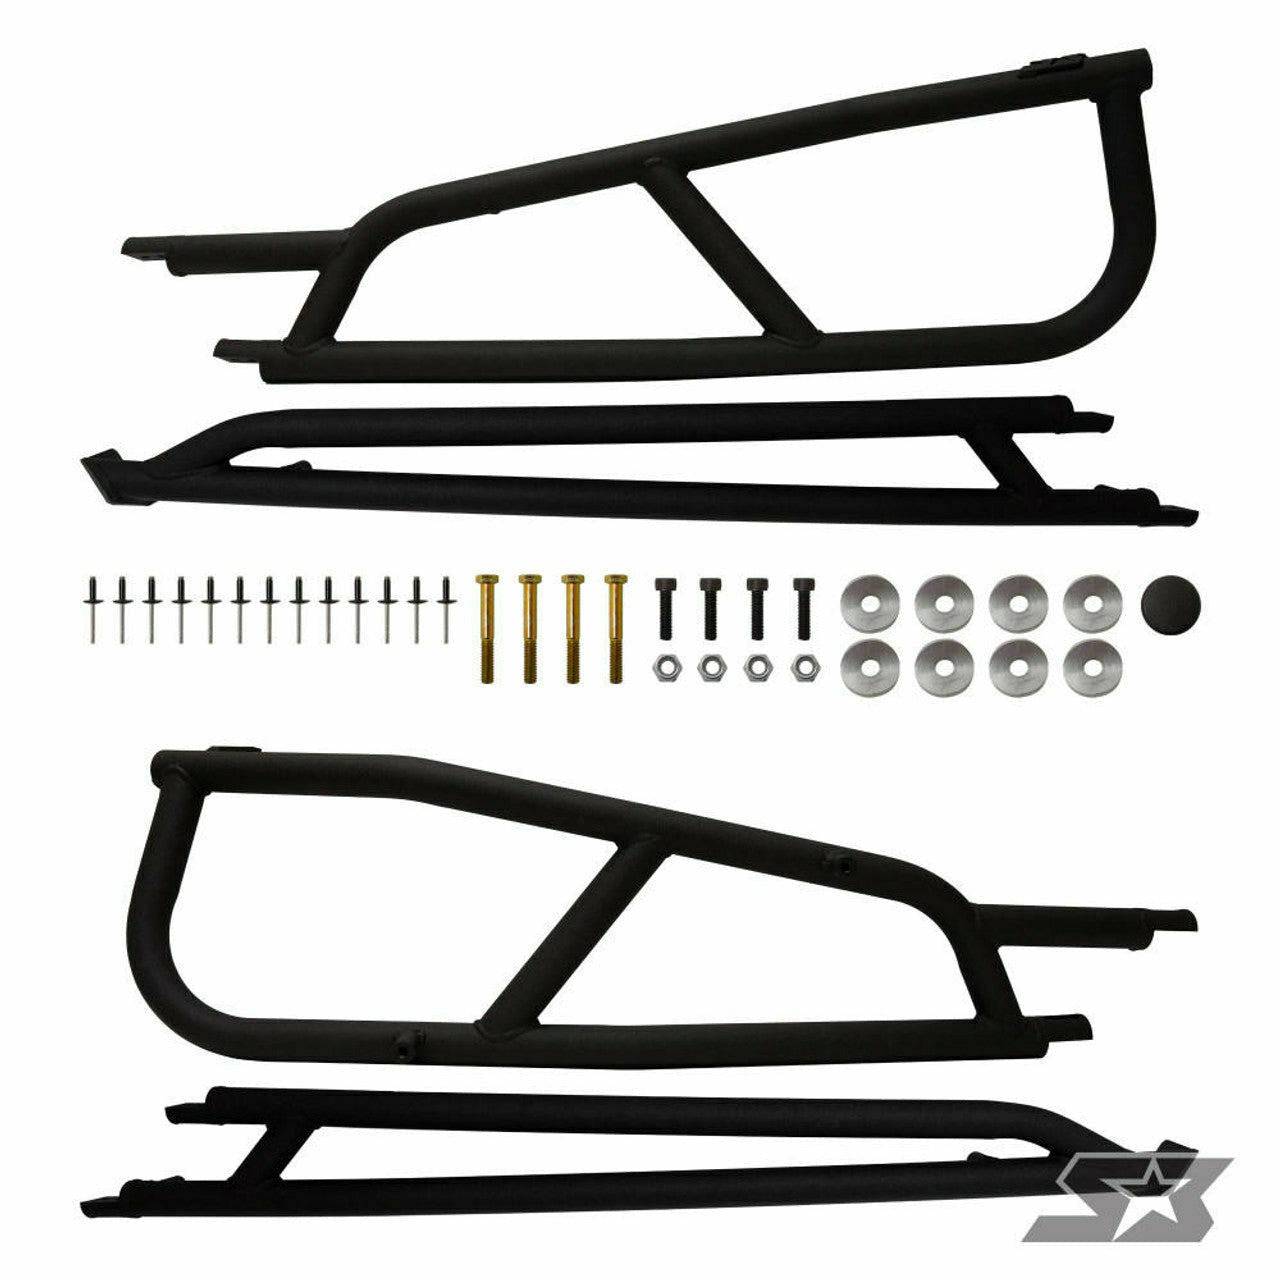 S3 Power Sports Can Am Commander MAX Nerf Bars